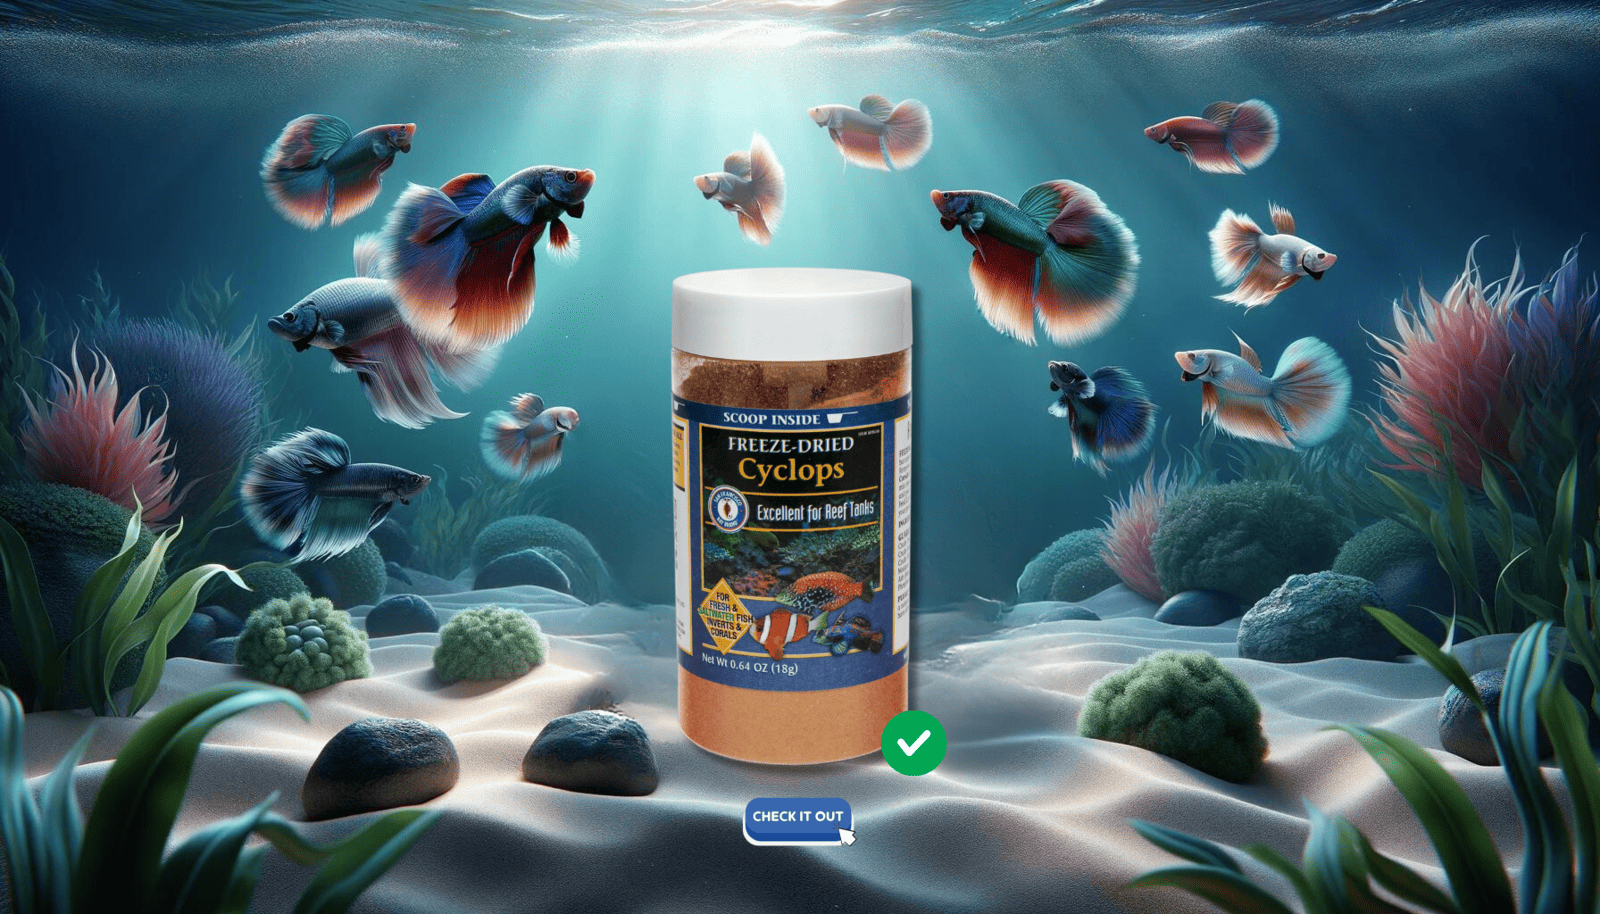 An advertisement for freeze-dried Cyclops, portraying colorful Betta fish swimming around the product, set in a serene underwater scene.